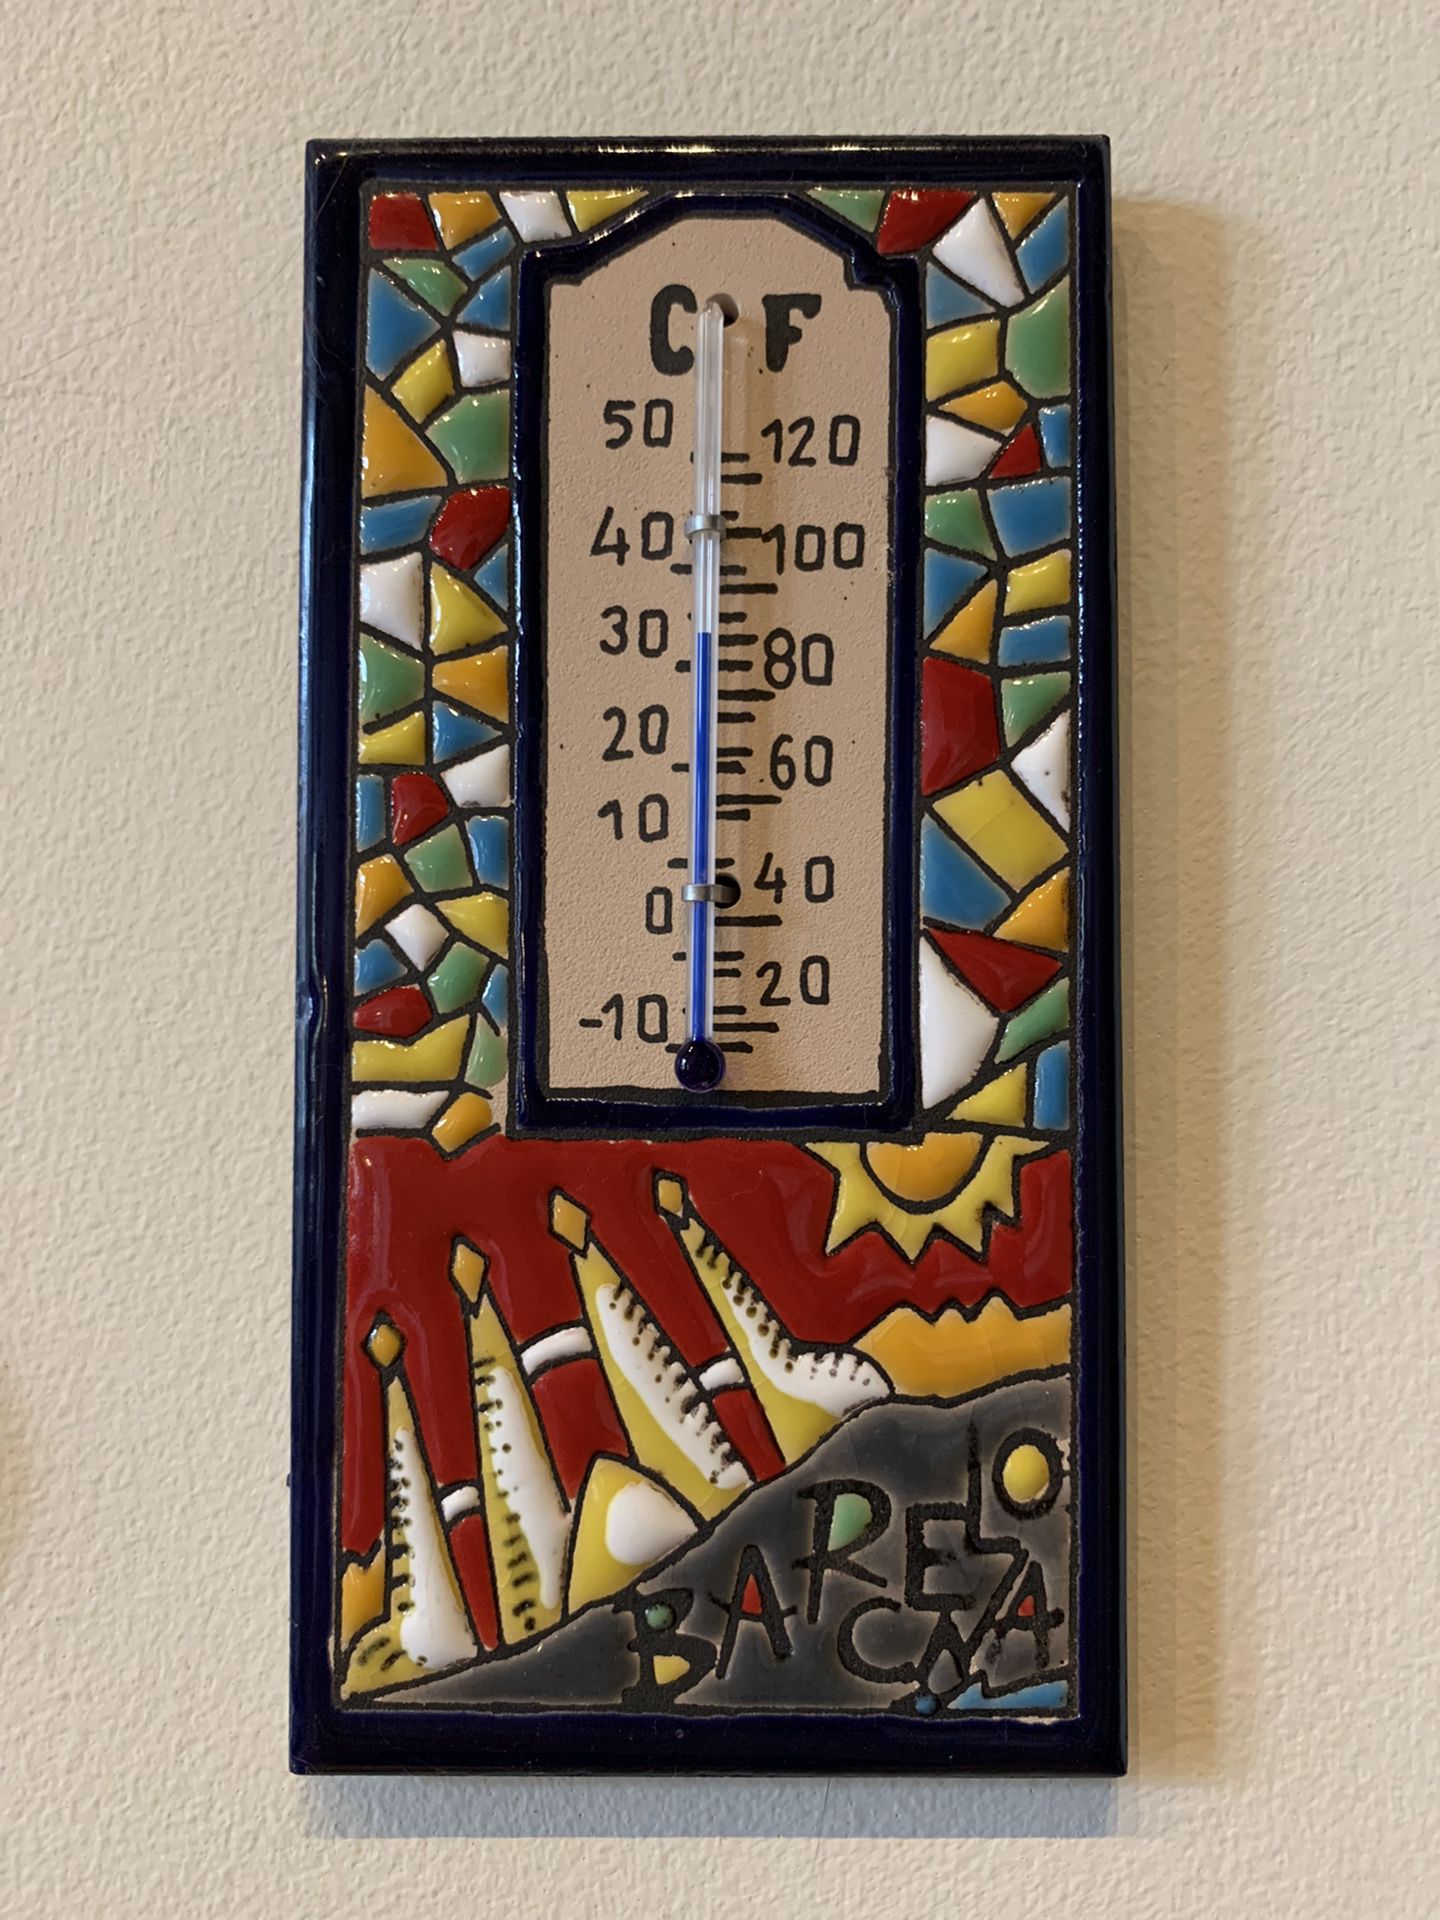 Decorative Thermometer Wall Hanging Thermometer, Souvenir From Barcelona  for Sale in The Bronx, NY - OfferUp